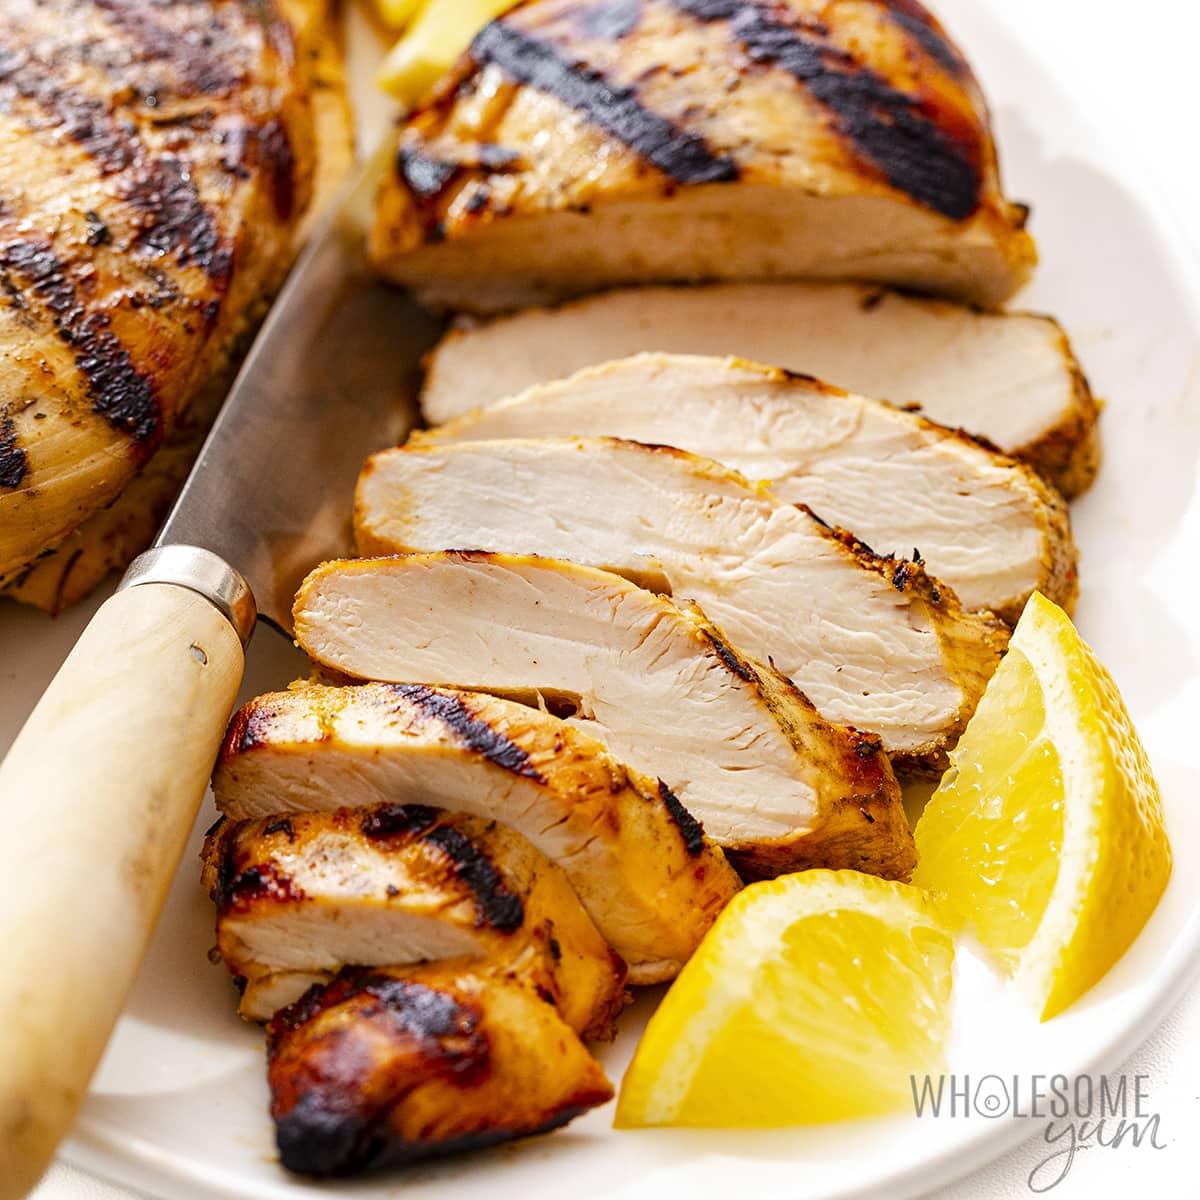 Grilled chicken breast close up.